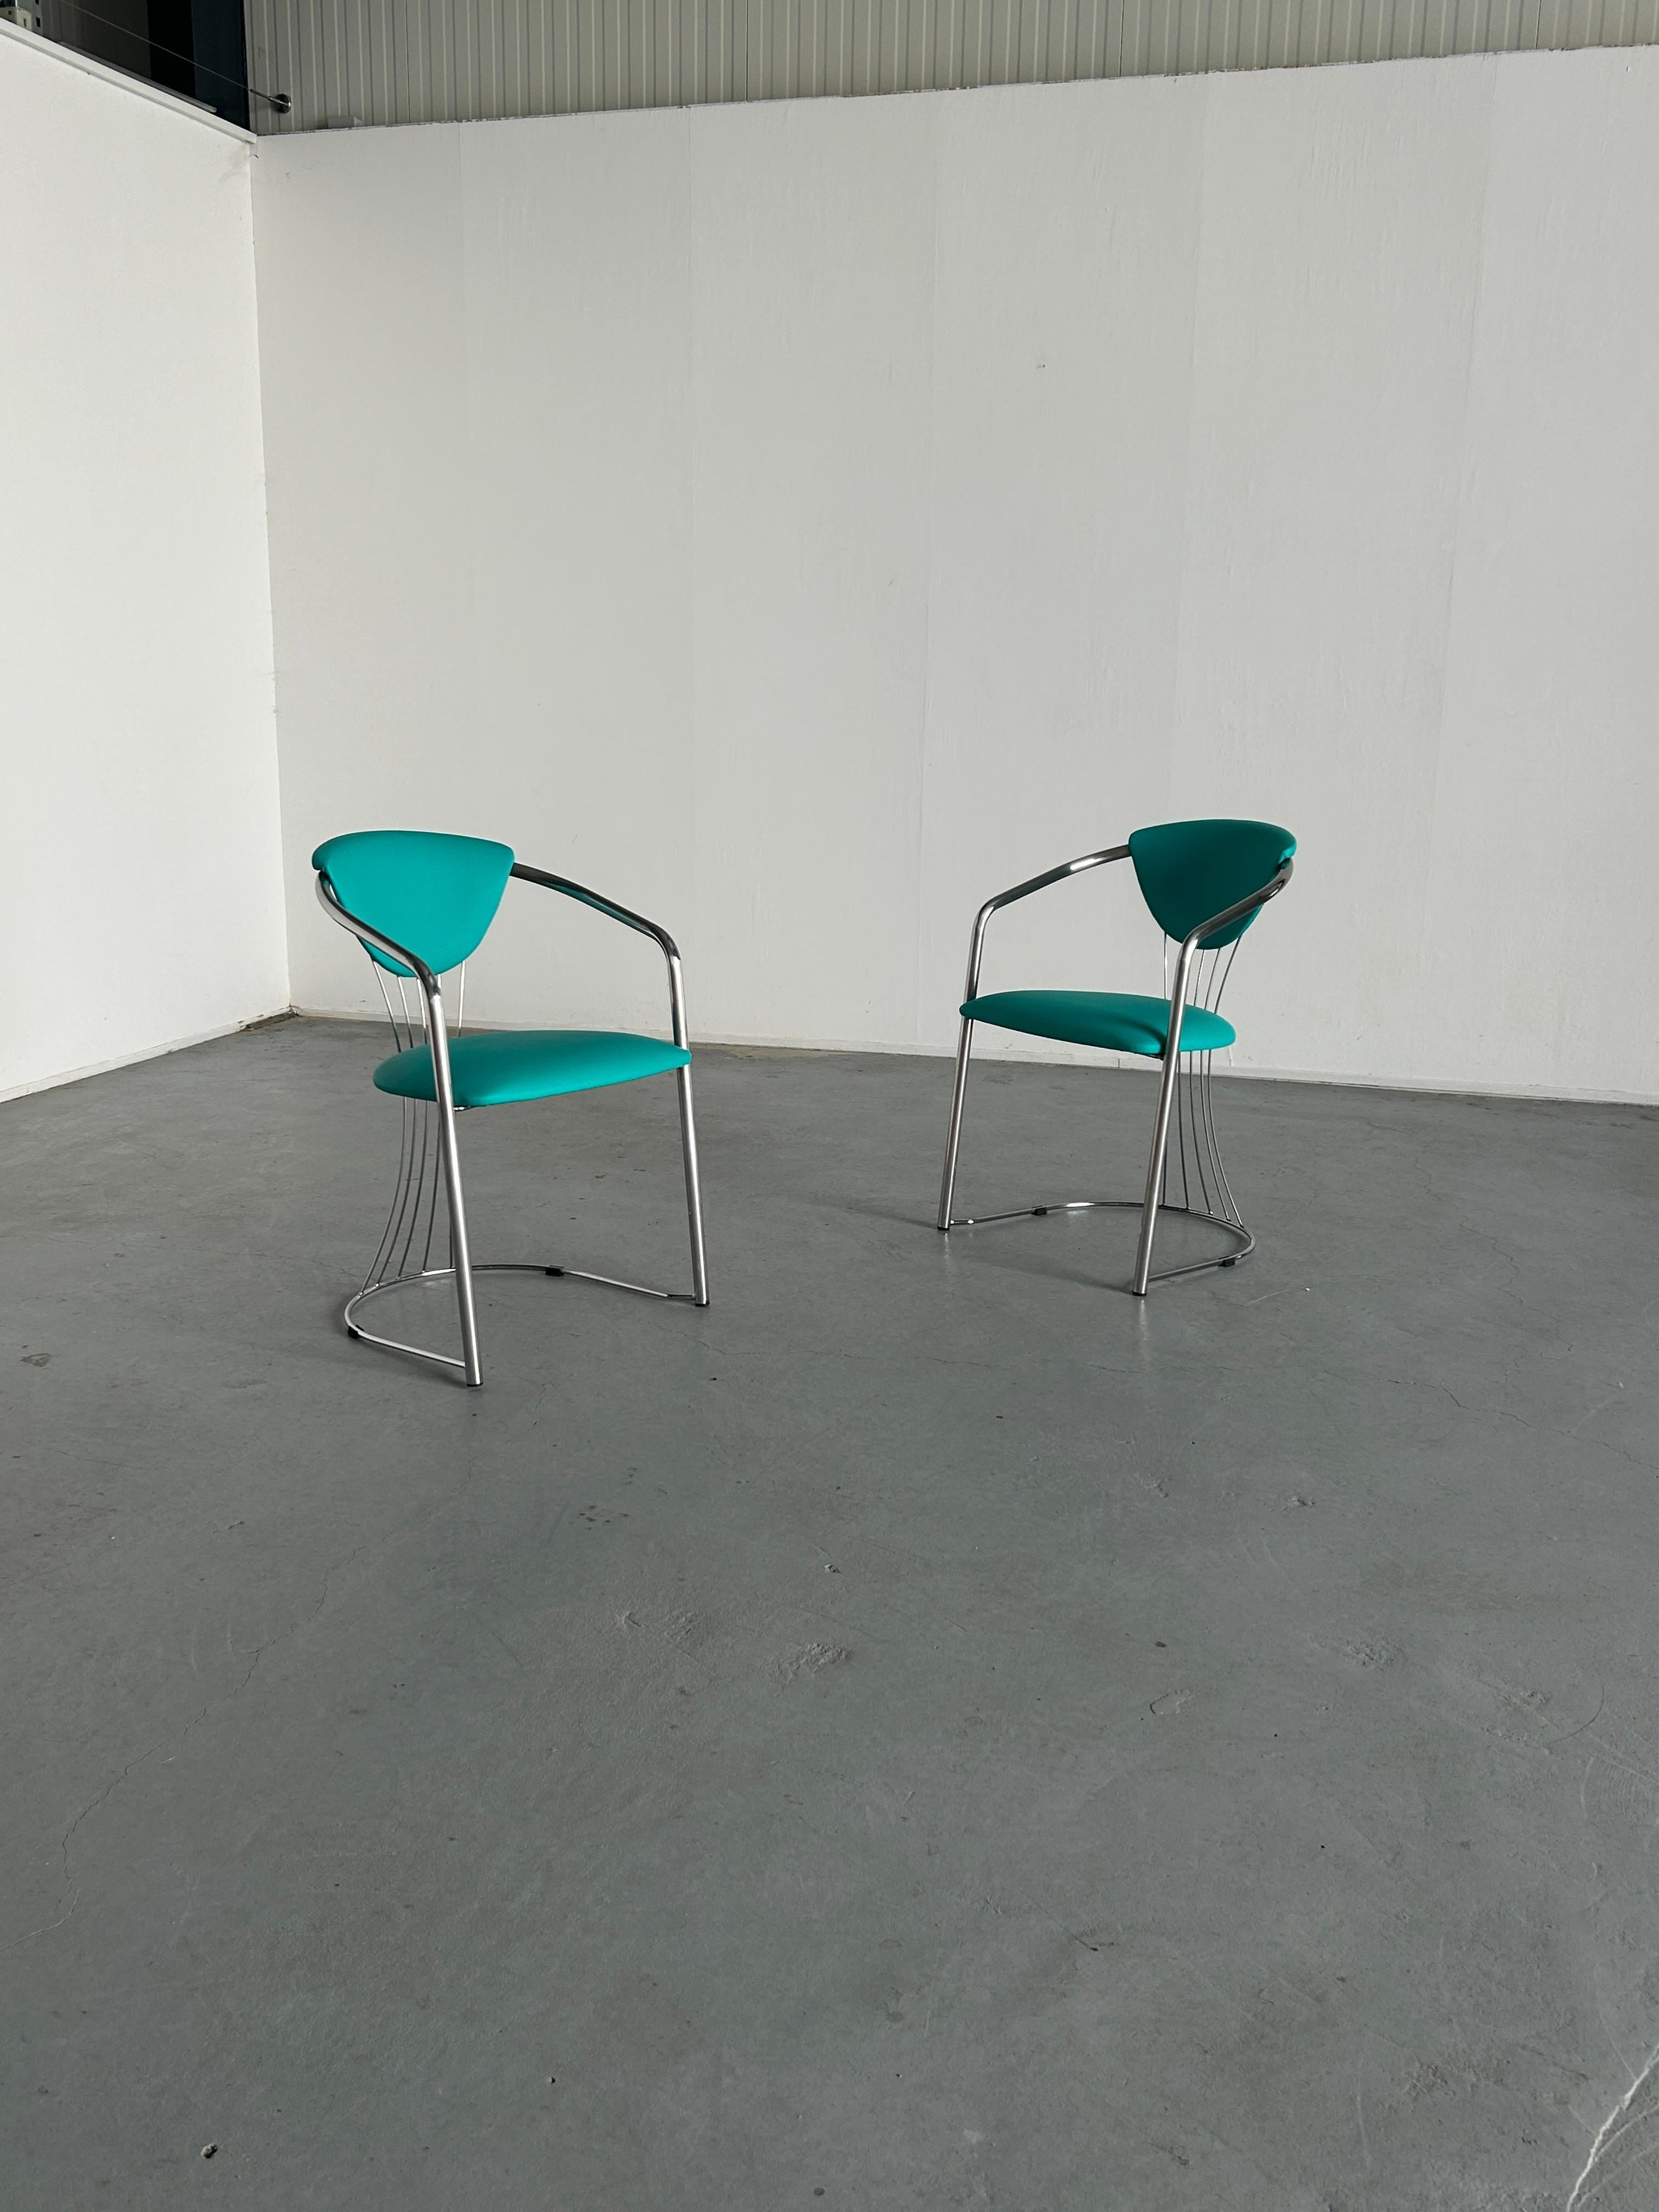 Two vintage Italian chrome and mint/teal green faux leather dining chairs, produced by Effezeta, 1990s Italy.

Quality made and in good vintage condition with expected signs of age, as can be seen from the photos.
Reupholstered. Smaller damages on